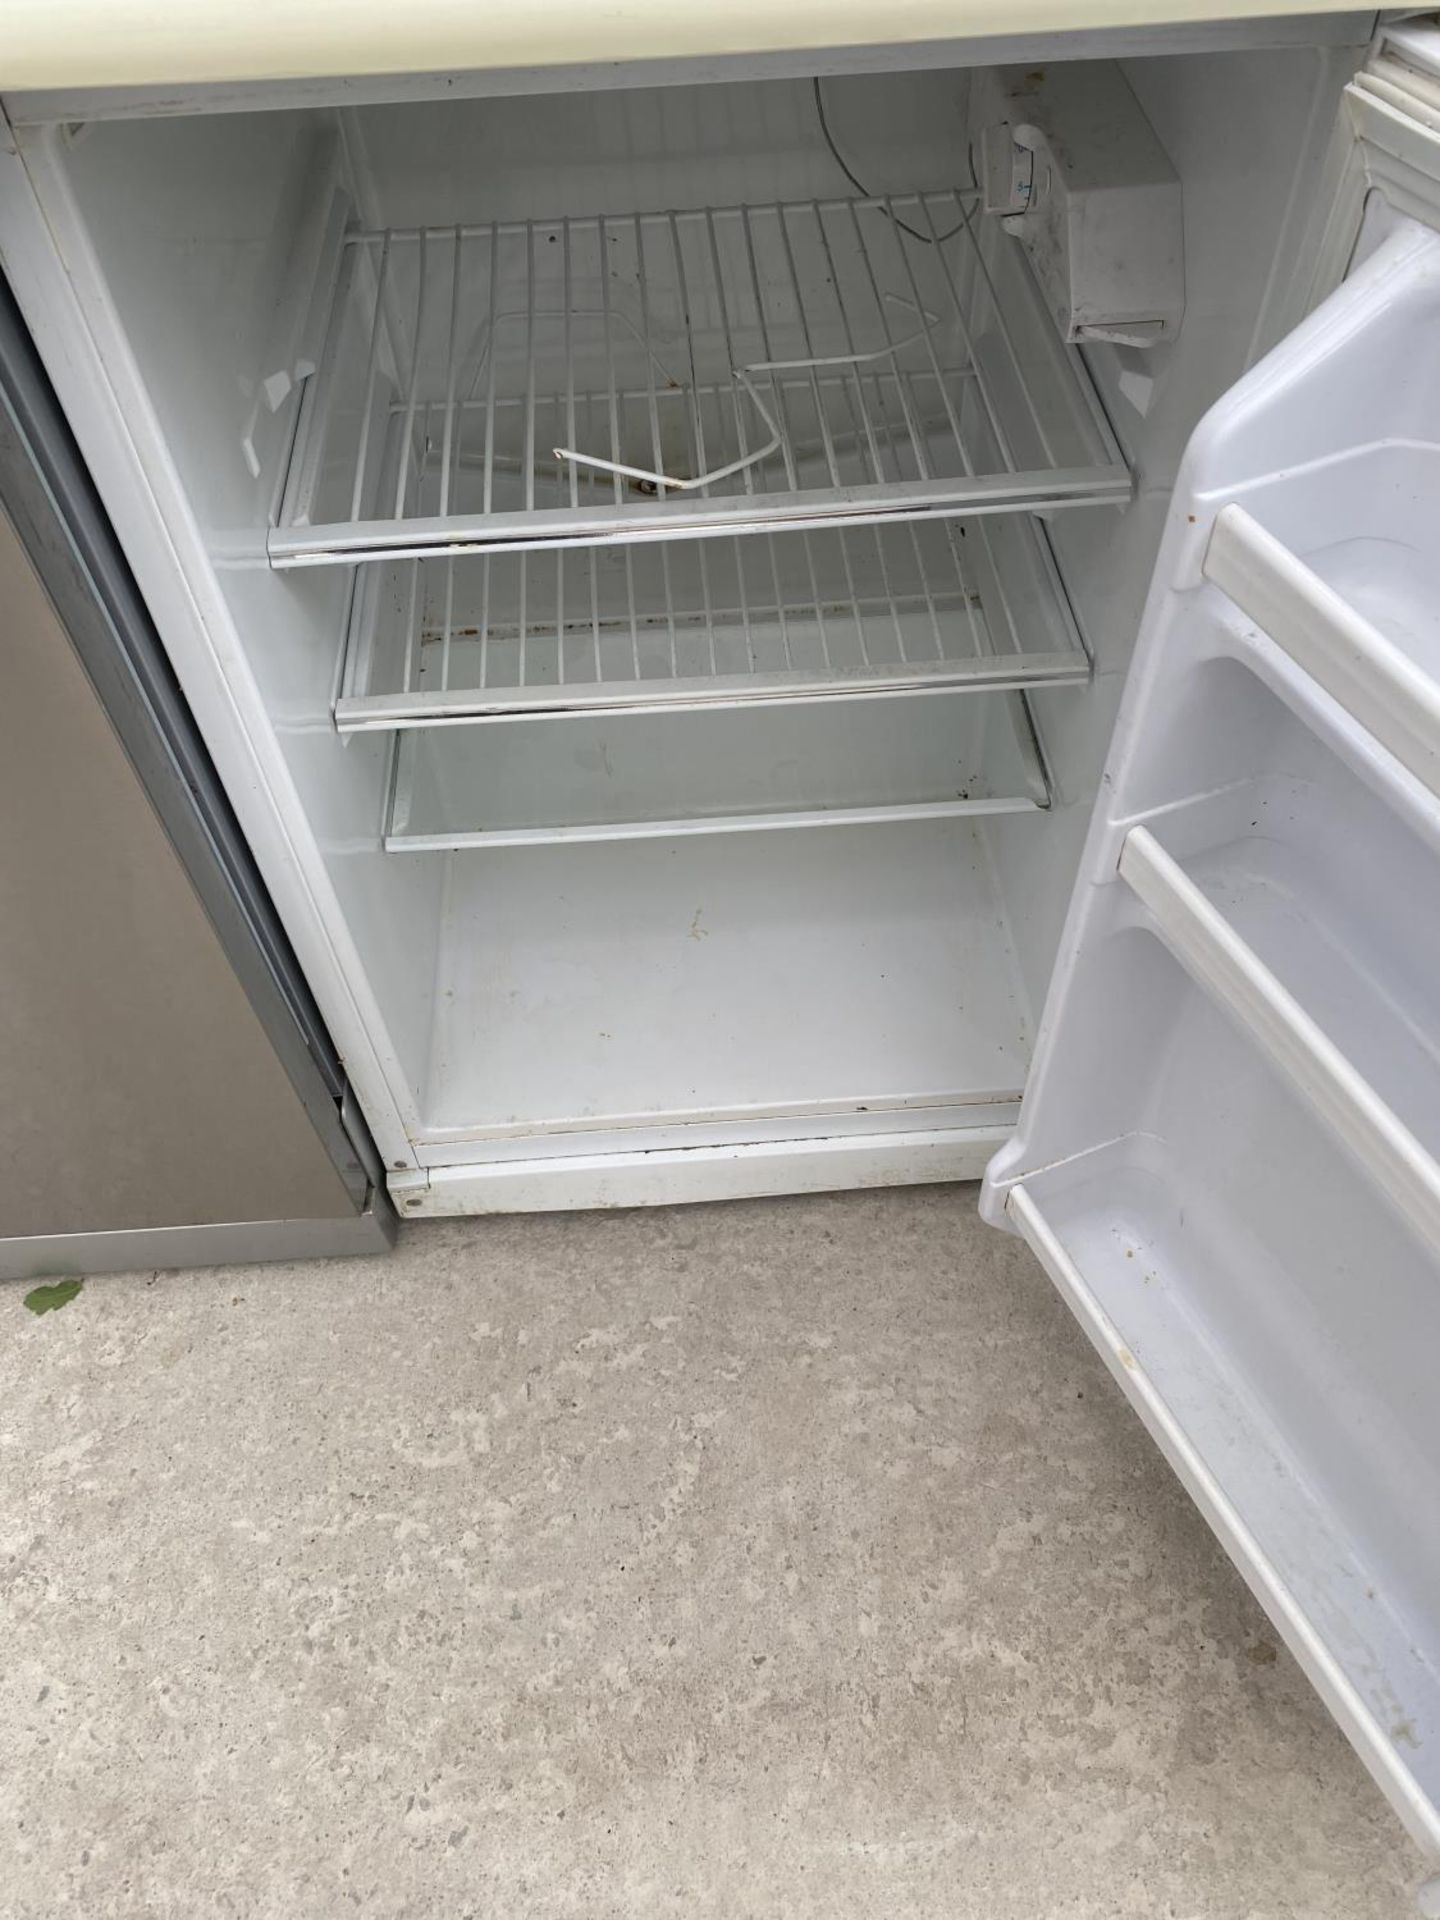 A PROLINE FRIDGE IN NEED OF CLEAN IN WORKING ORDER - Image 2 of 2